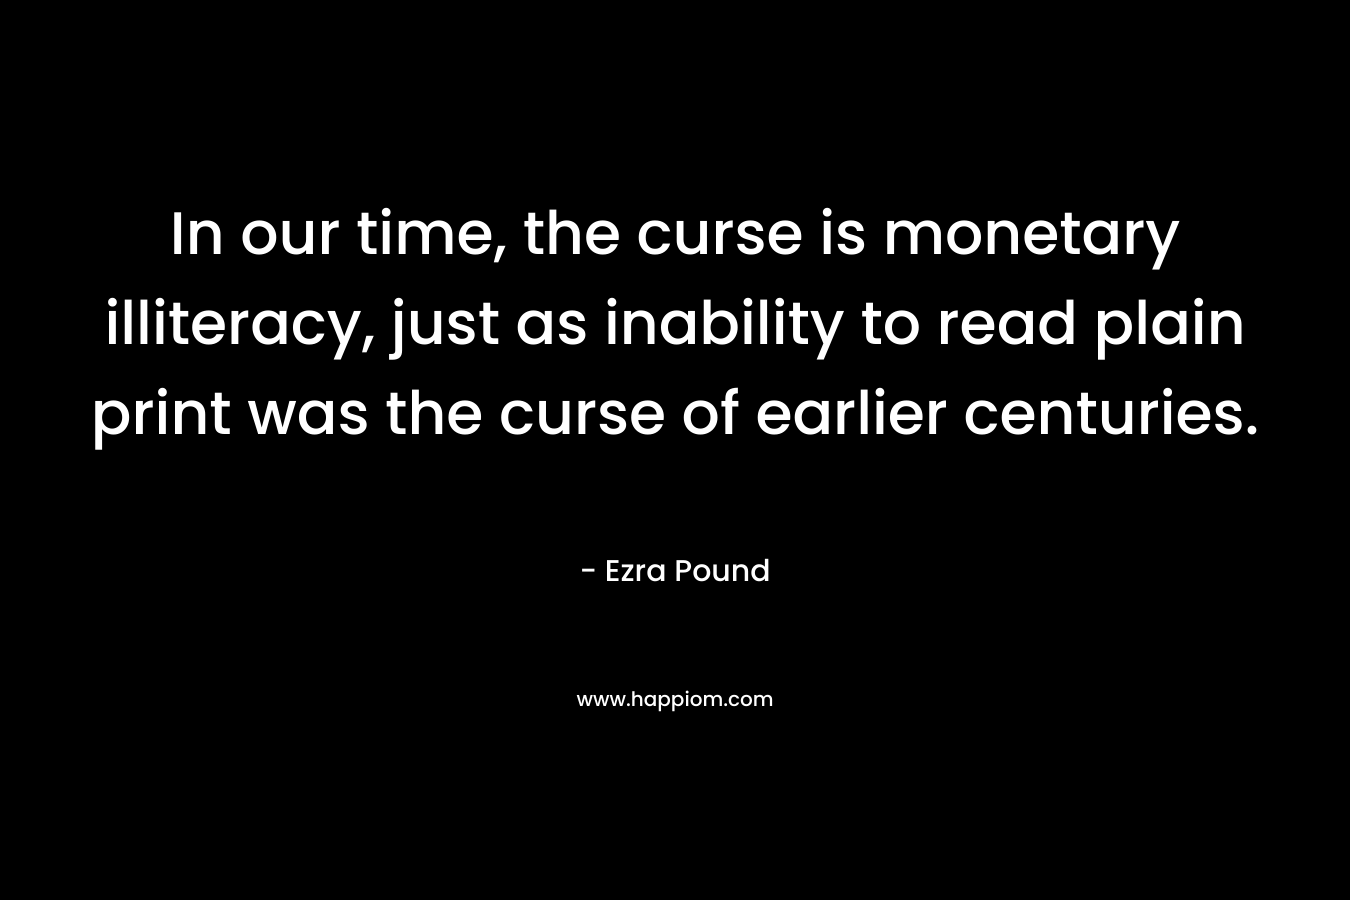 In our time, the curse is monetary illiteracy, just as inability to read plain print was the curse of earlier centuries. – Ezra Pound